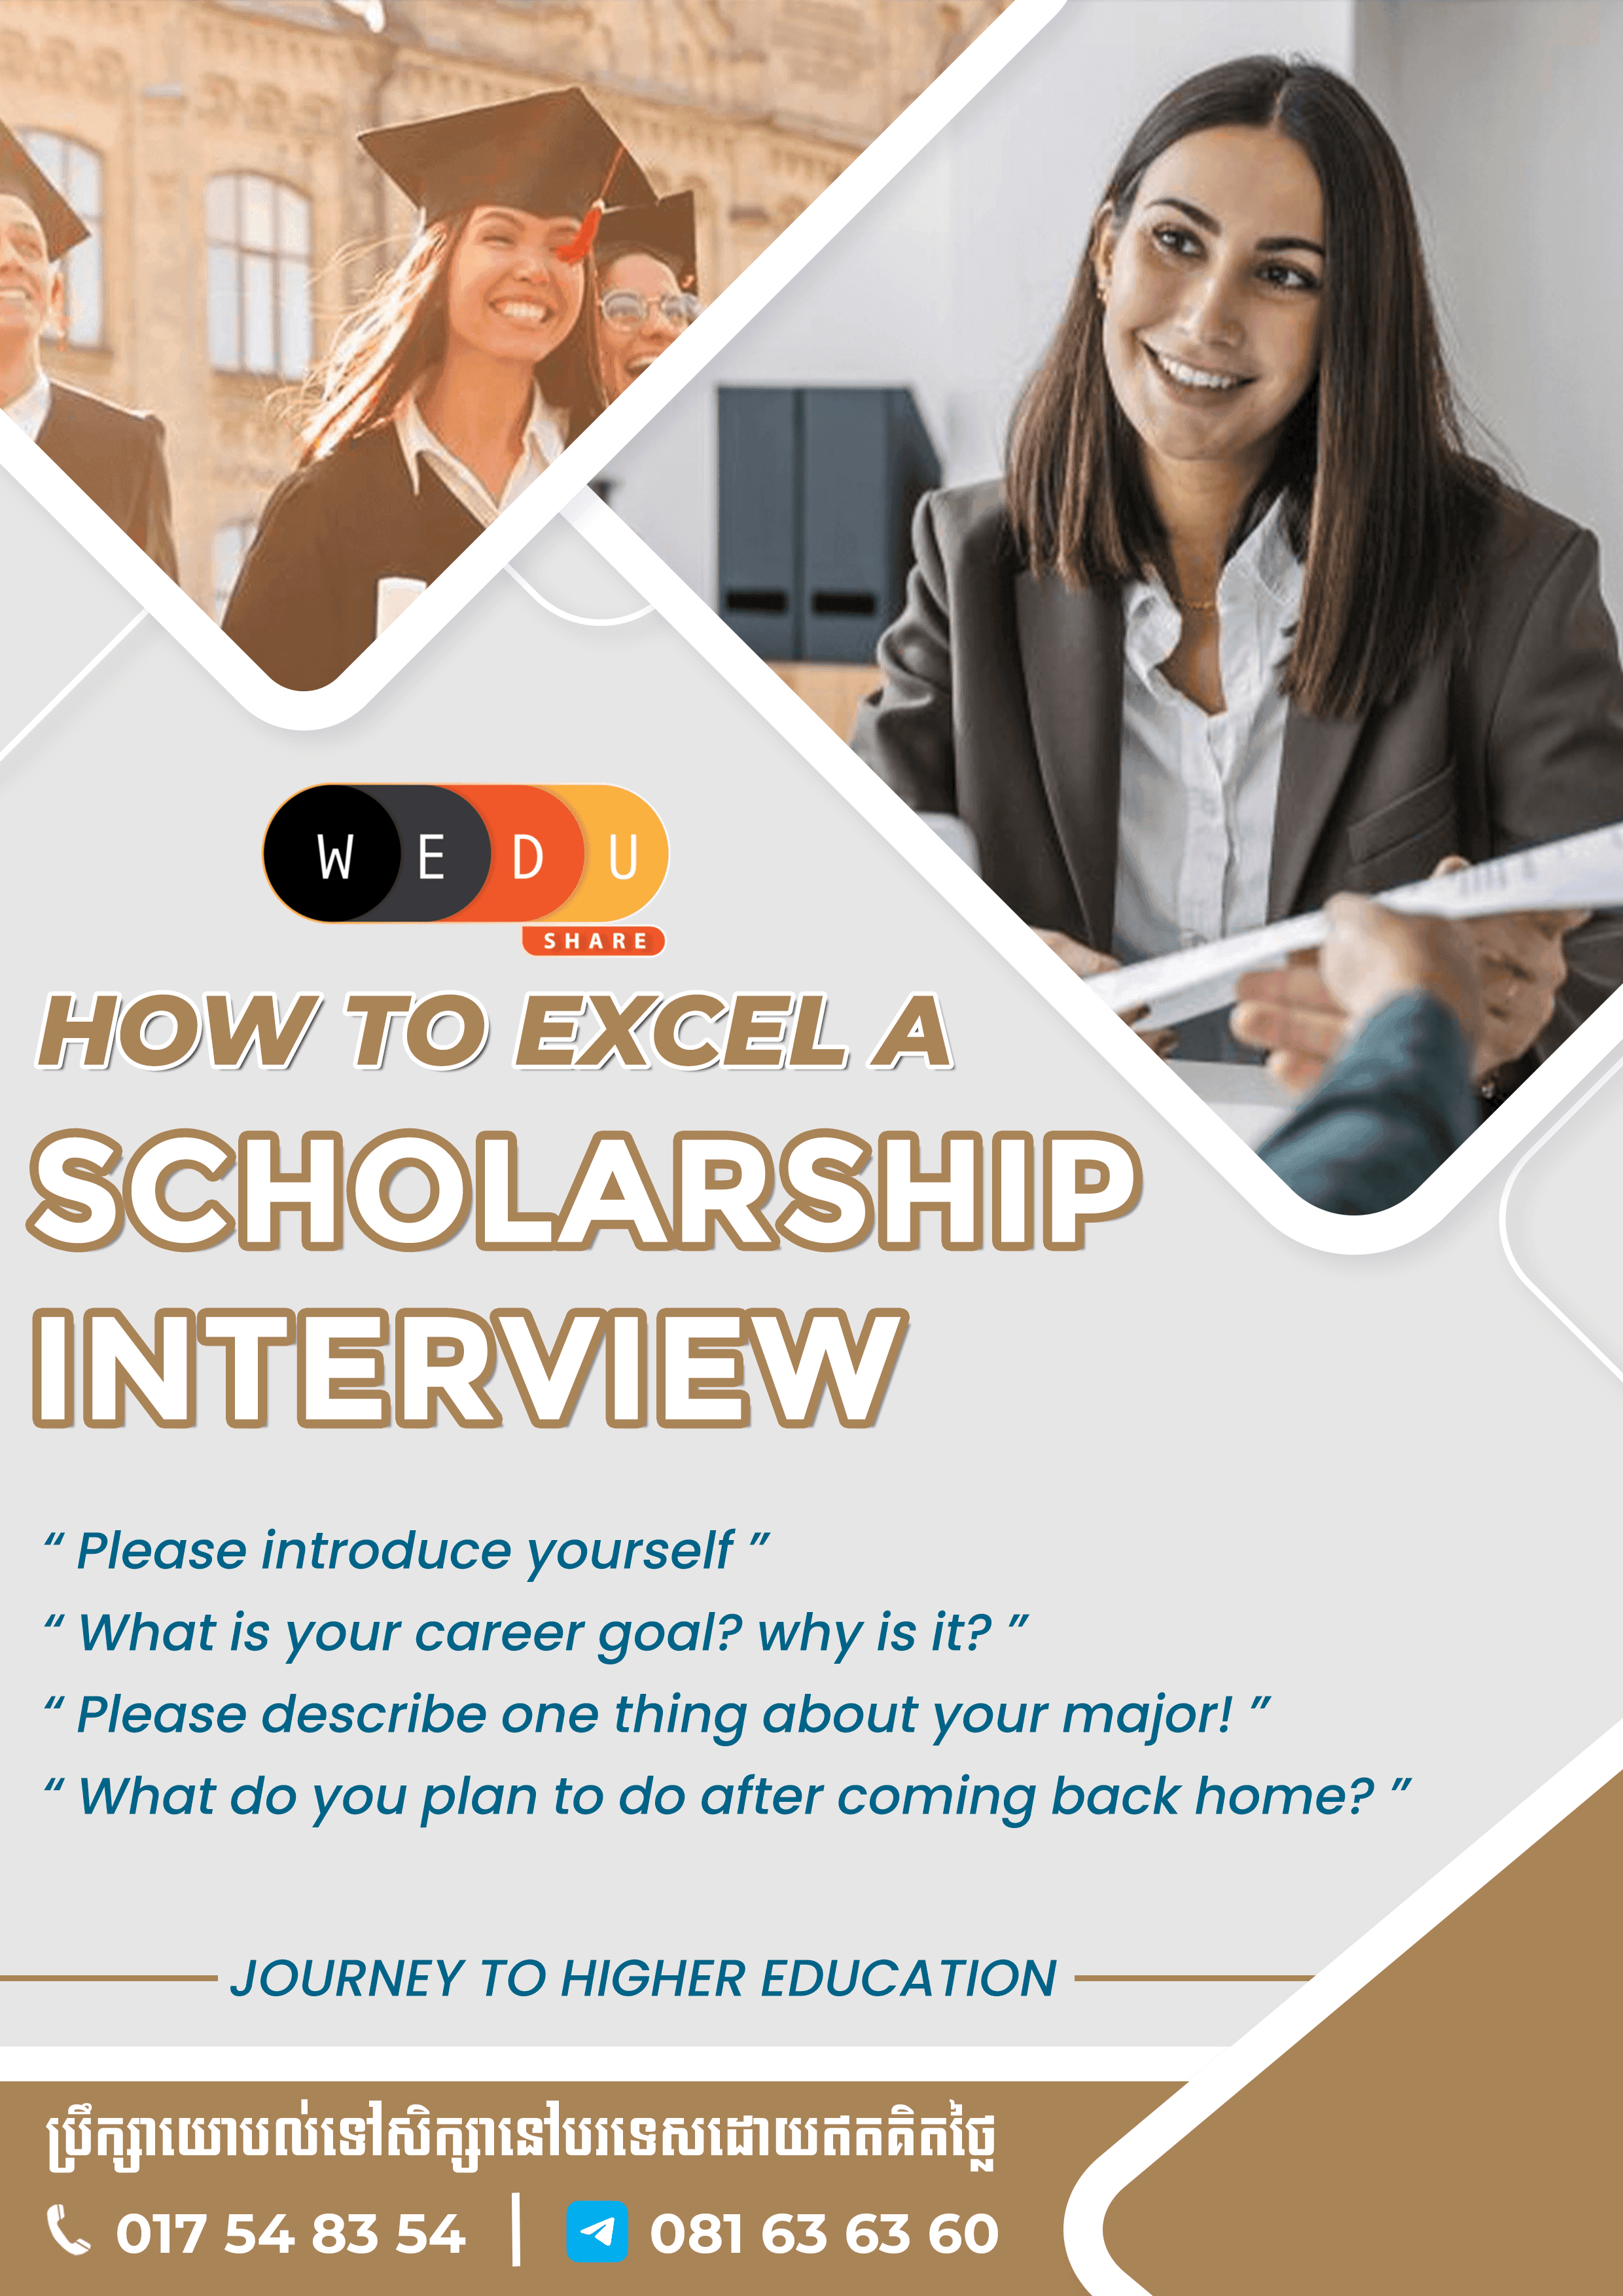 E-Guidebook: How to Excel a Scholarship Interview